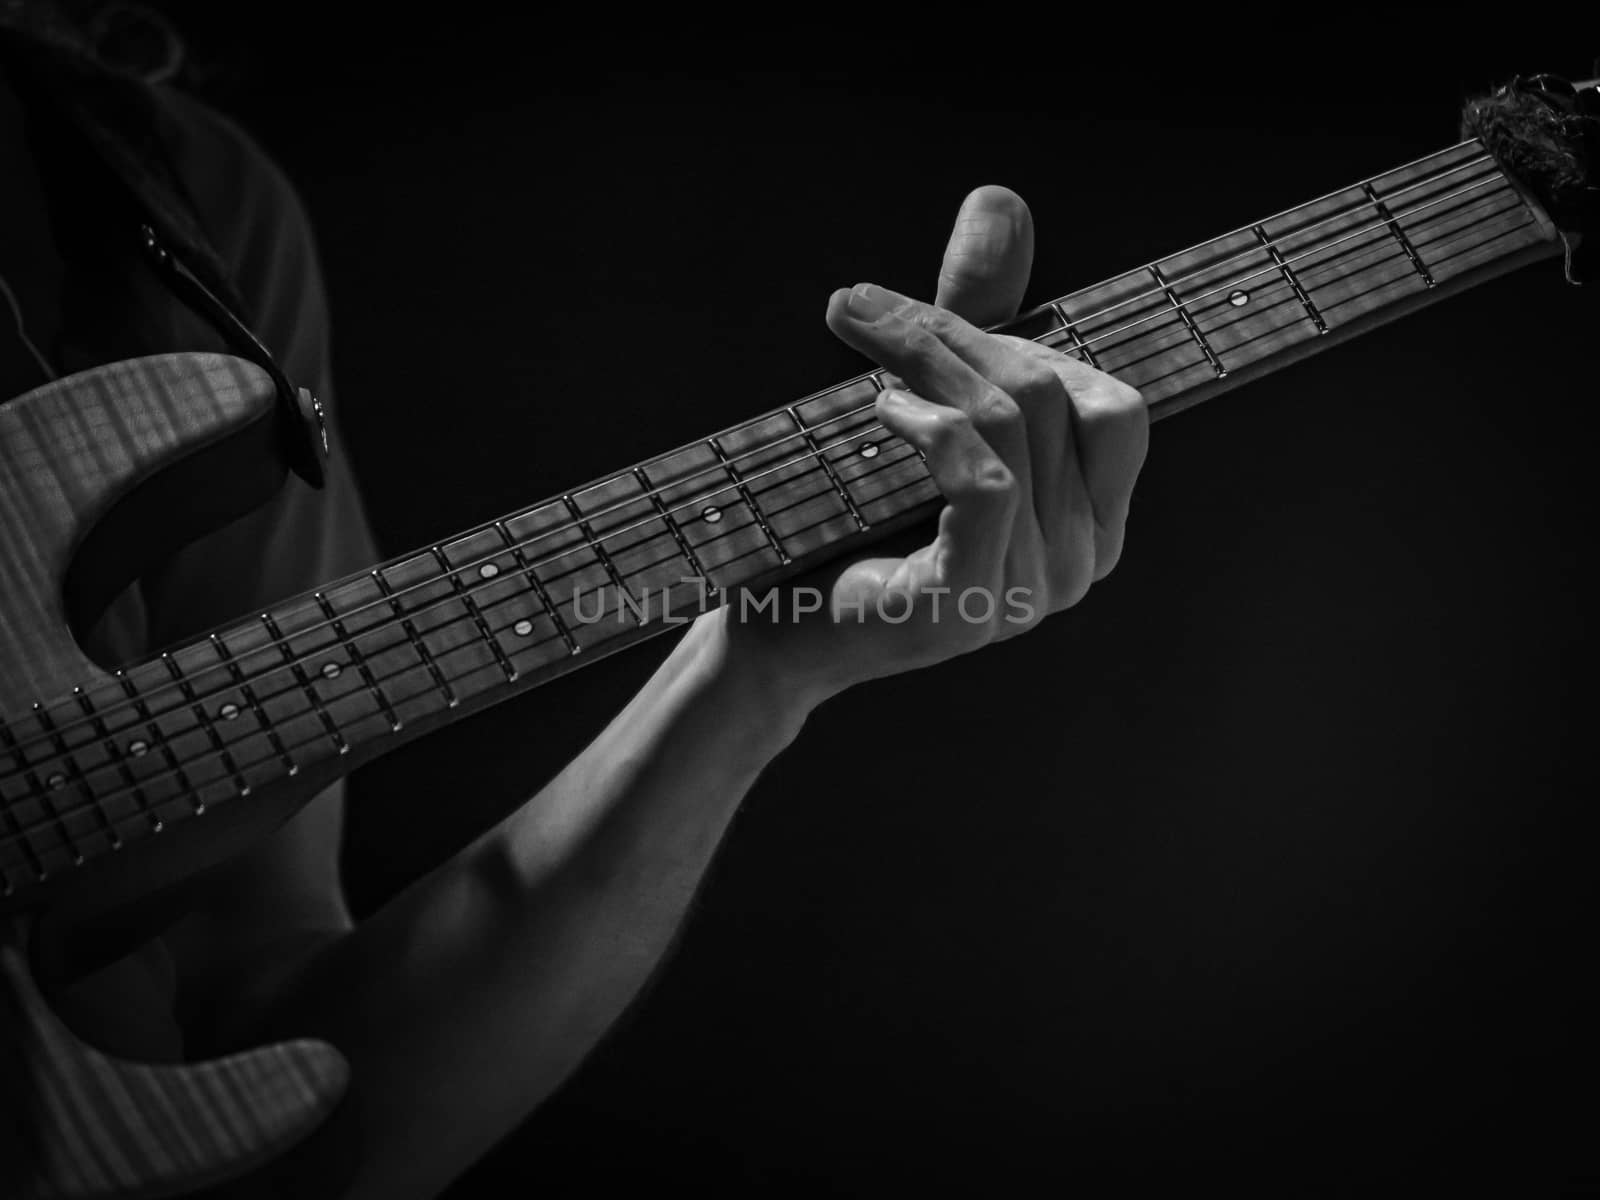 detail of hand playing an electric guitar, black and white image